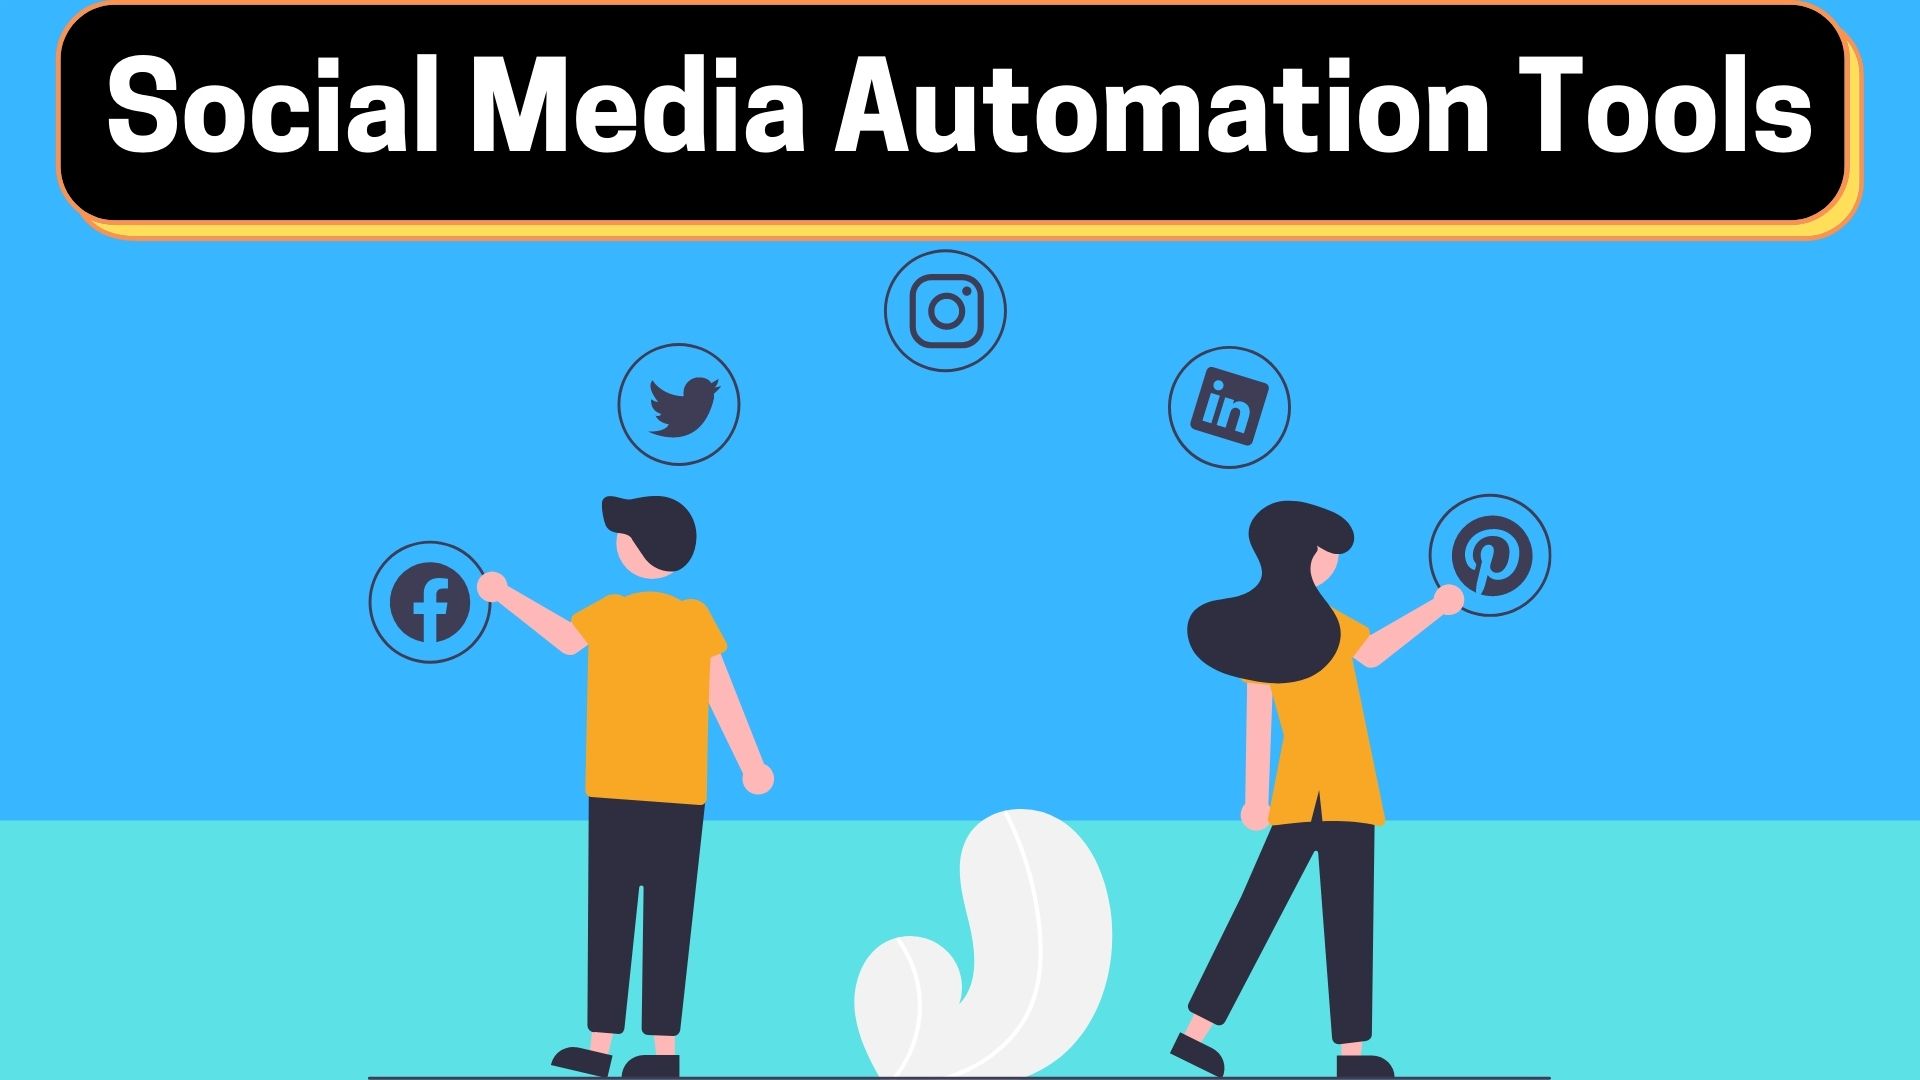 9 Tools to Simplify and Automate Social Media - Inc.com